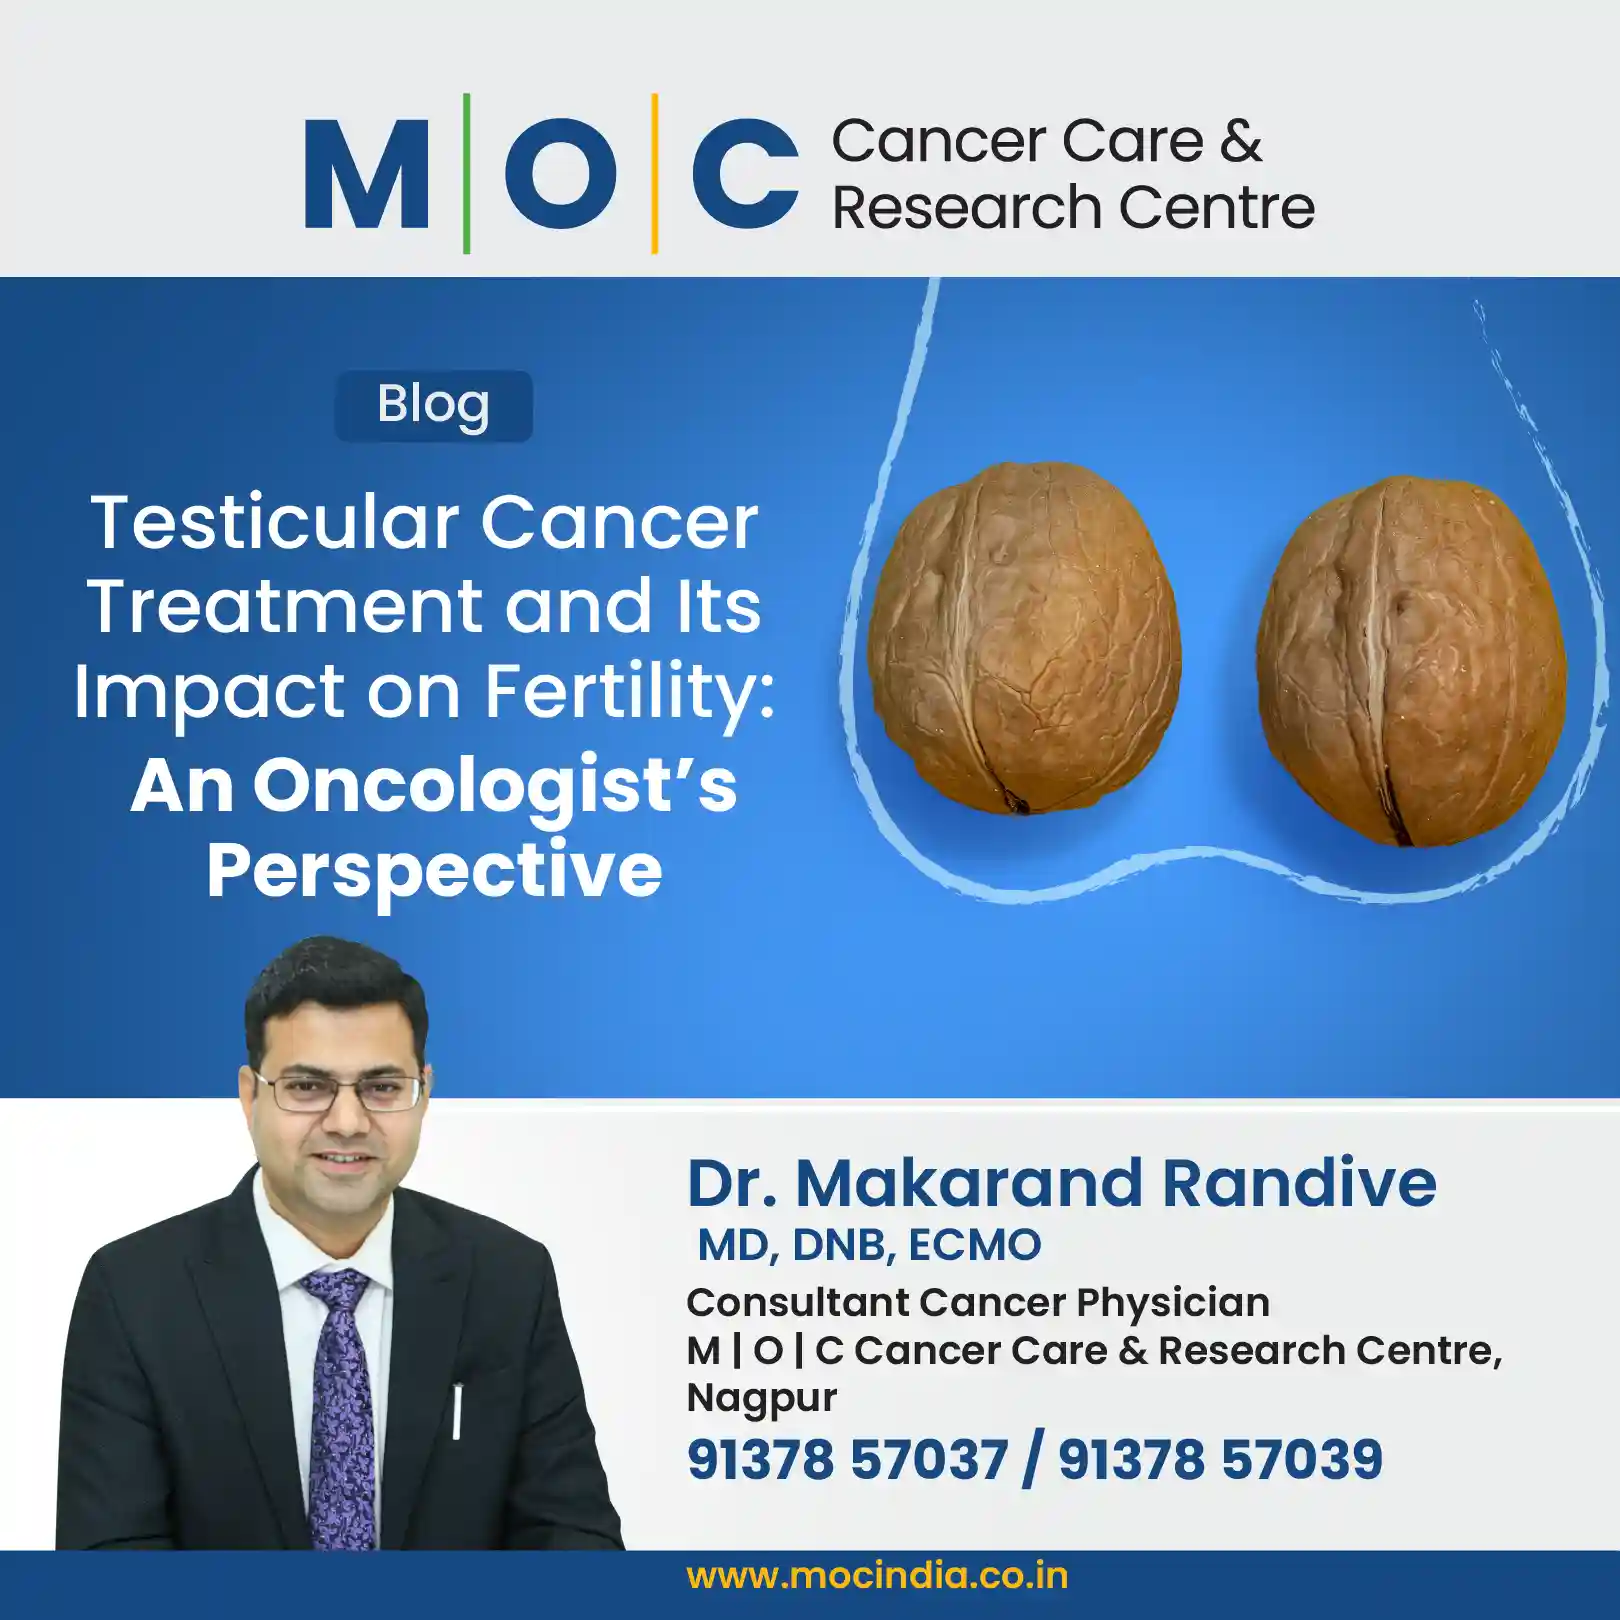 Testicular Cancer Treatment & IT’s Impact on Fertility: An Oncologist’s Perspective